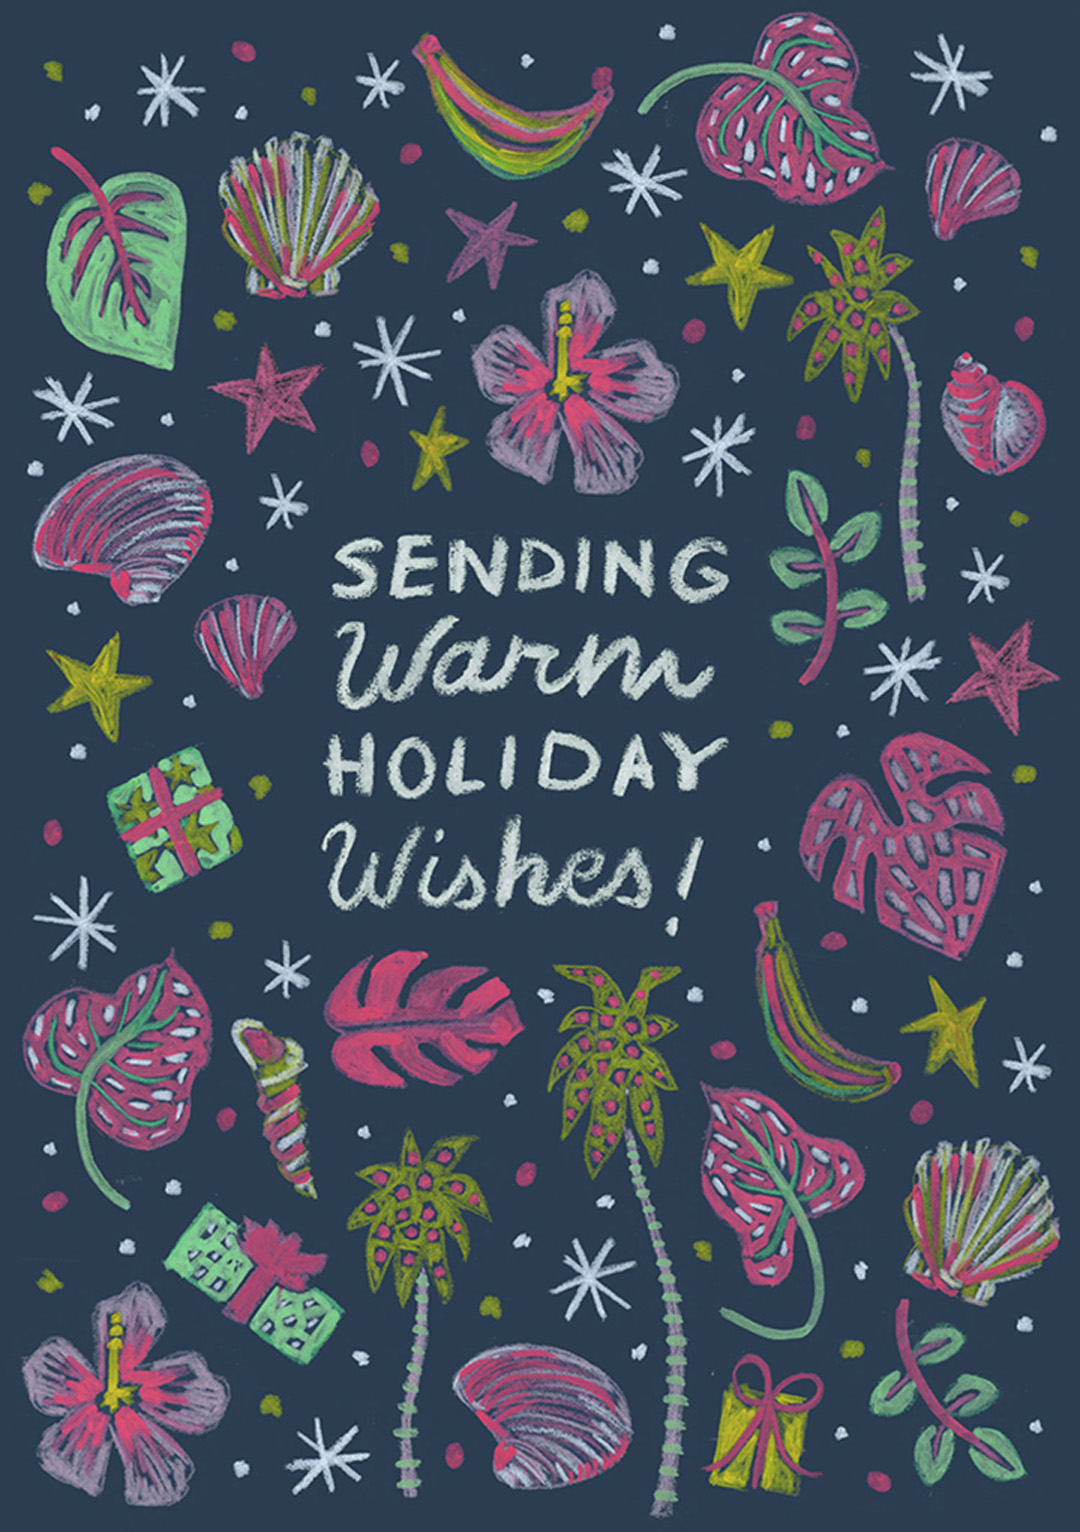 Warm Holiday Wishes Greetings Card